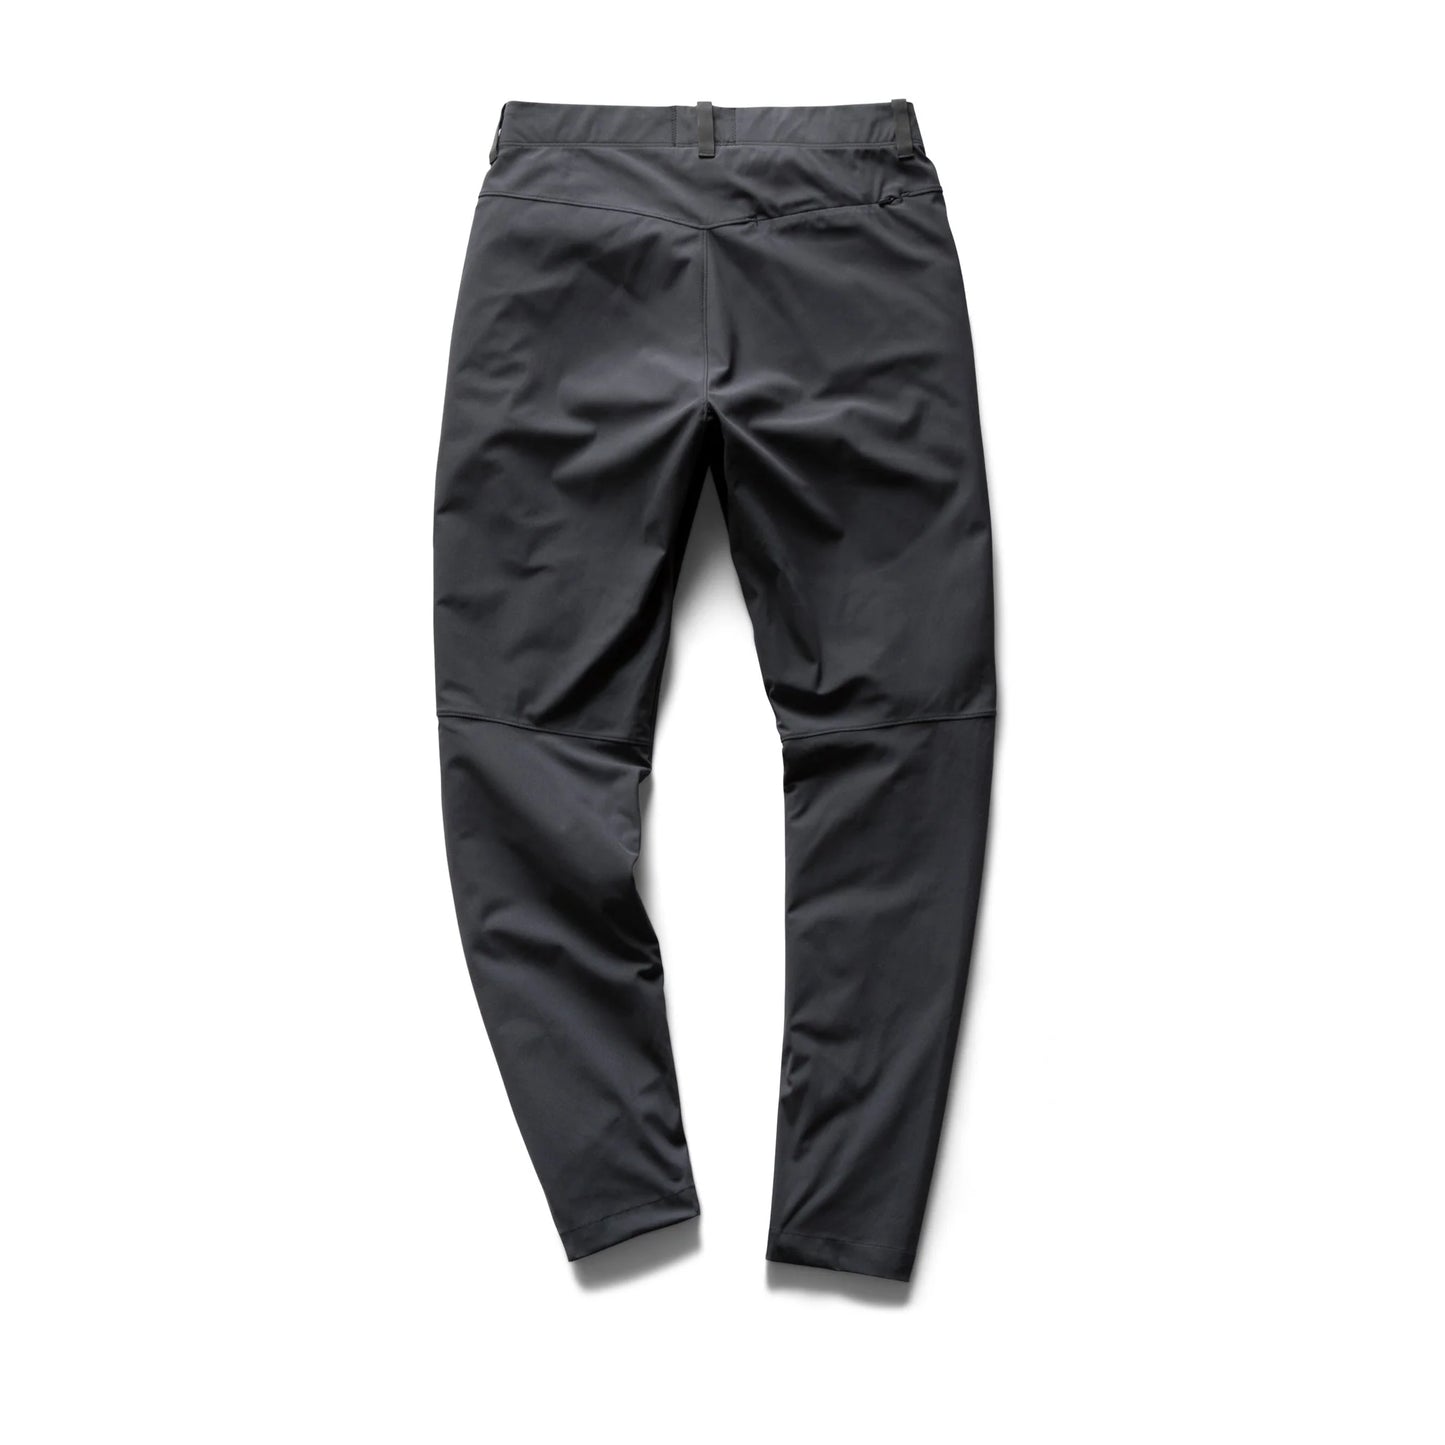 Reigning Champ Coaches Pant -Charcoal